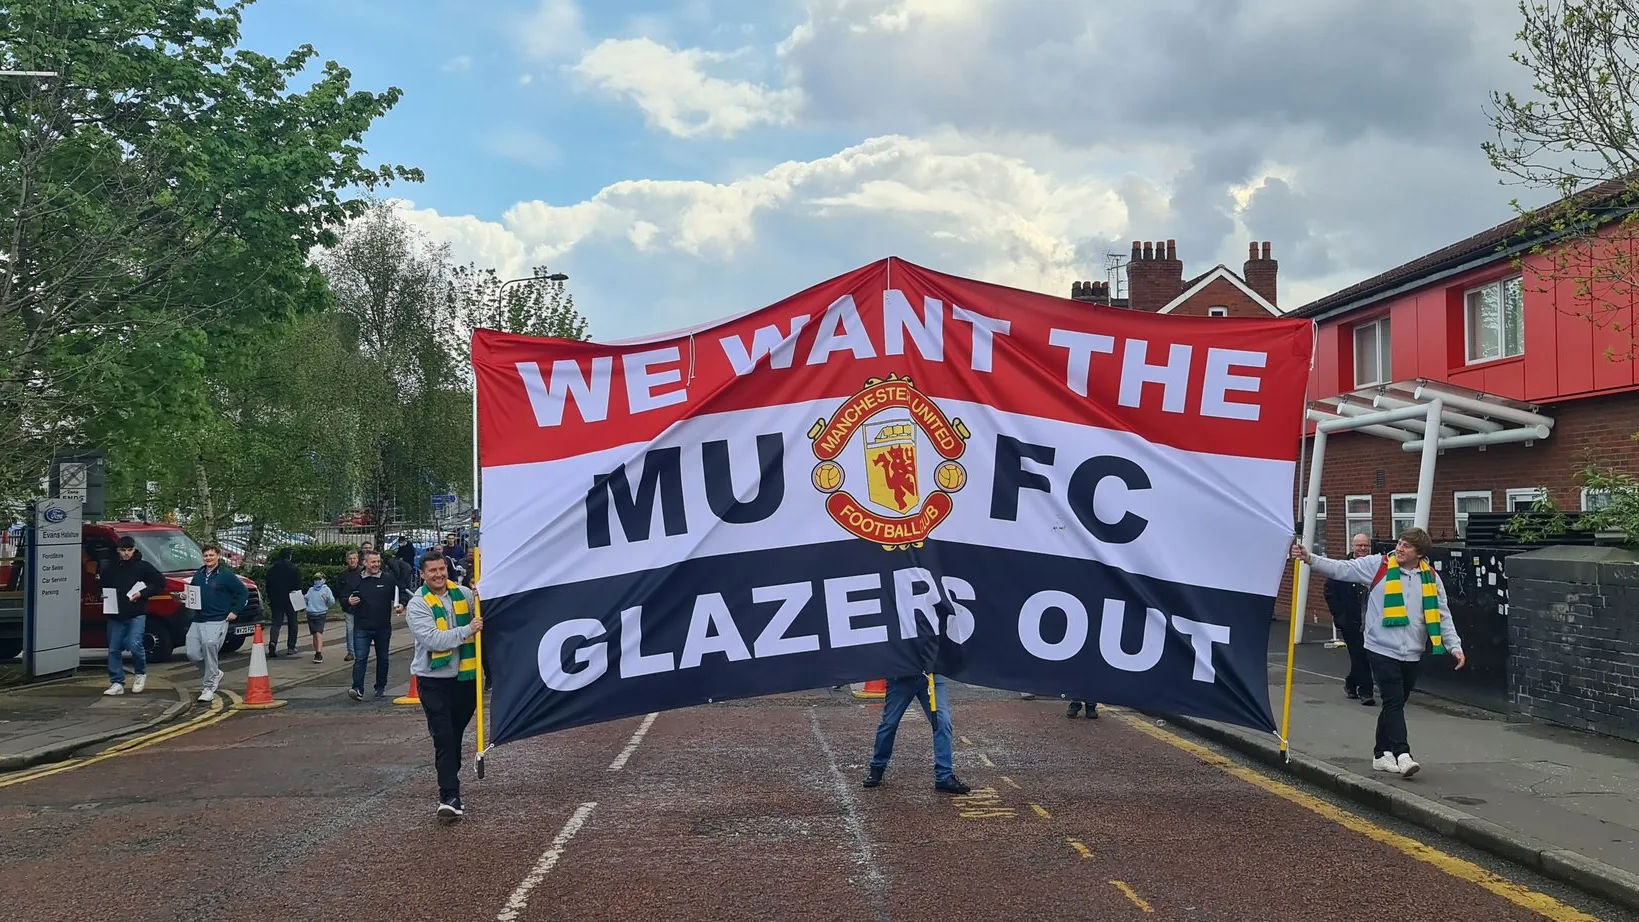 #GlazersOut: Man Utd fans invade Old Trafford pitch in protest against American owners